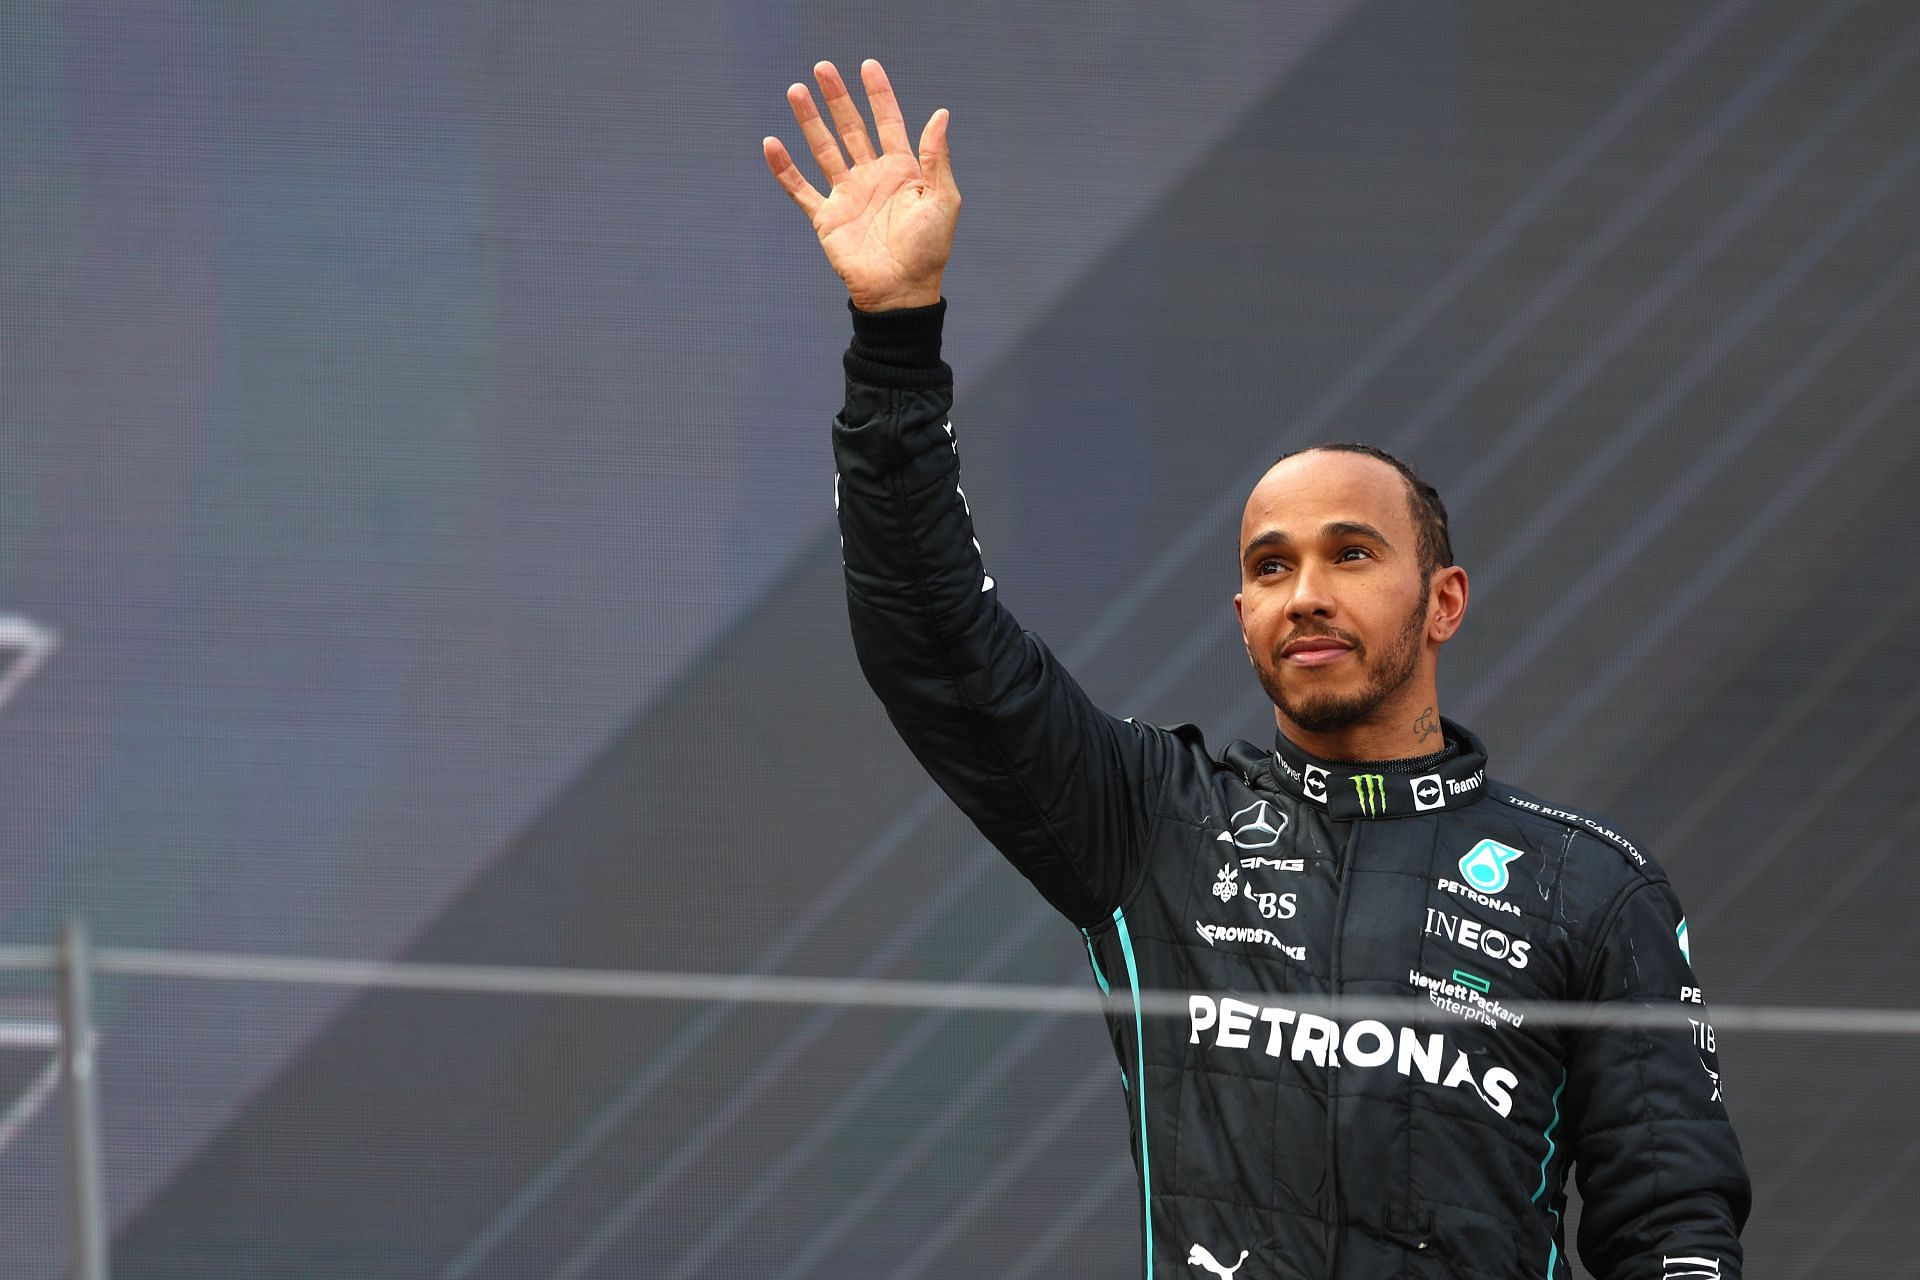 Lewis Hamilton will be racing in his 300th race this weekend